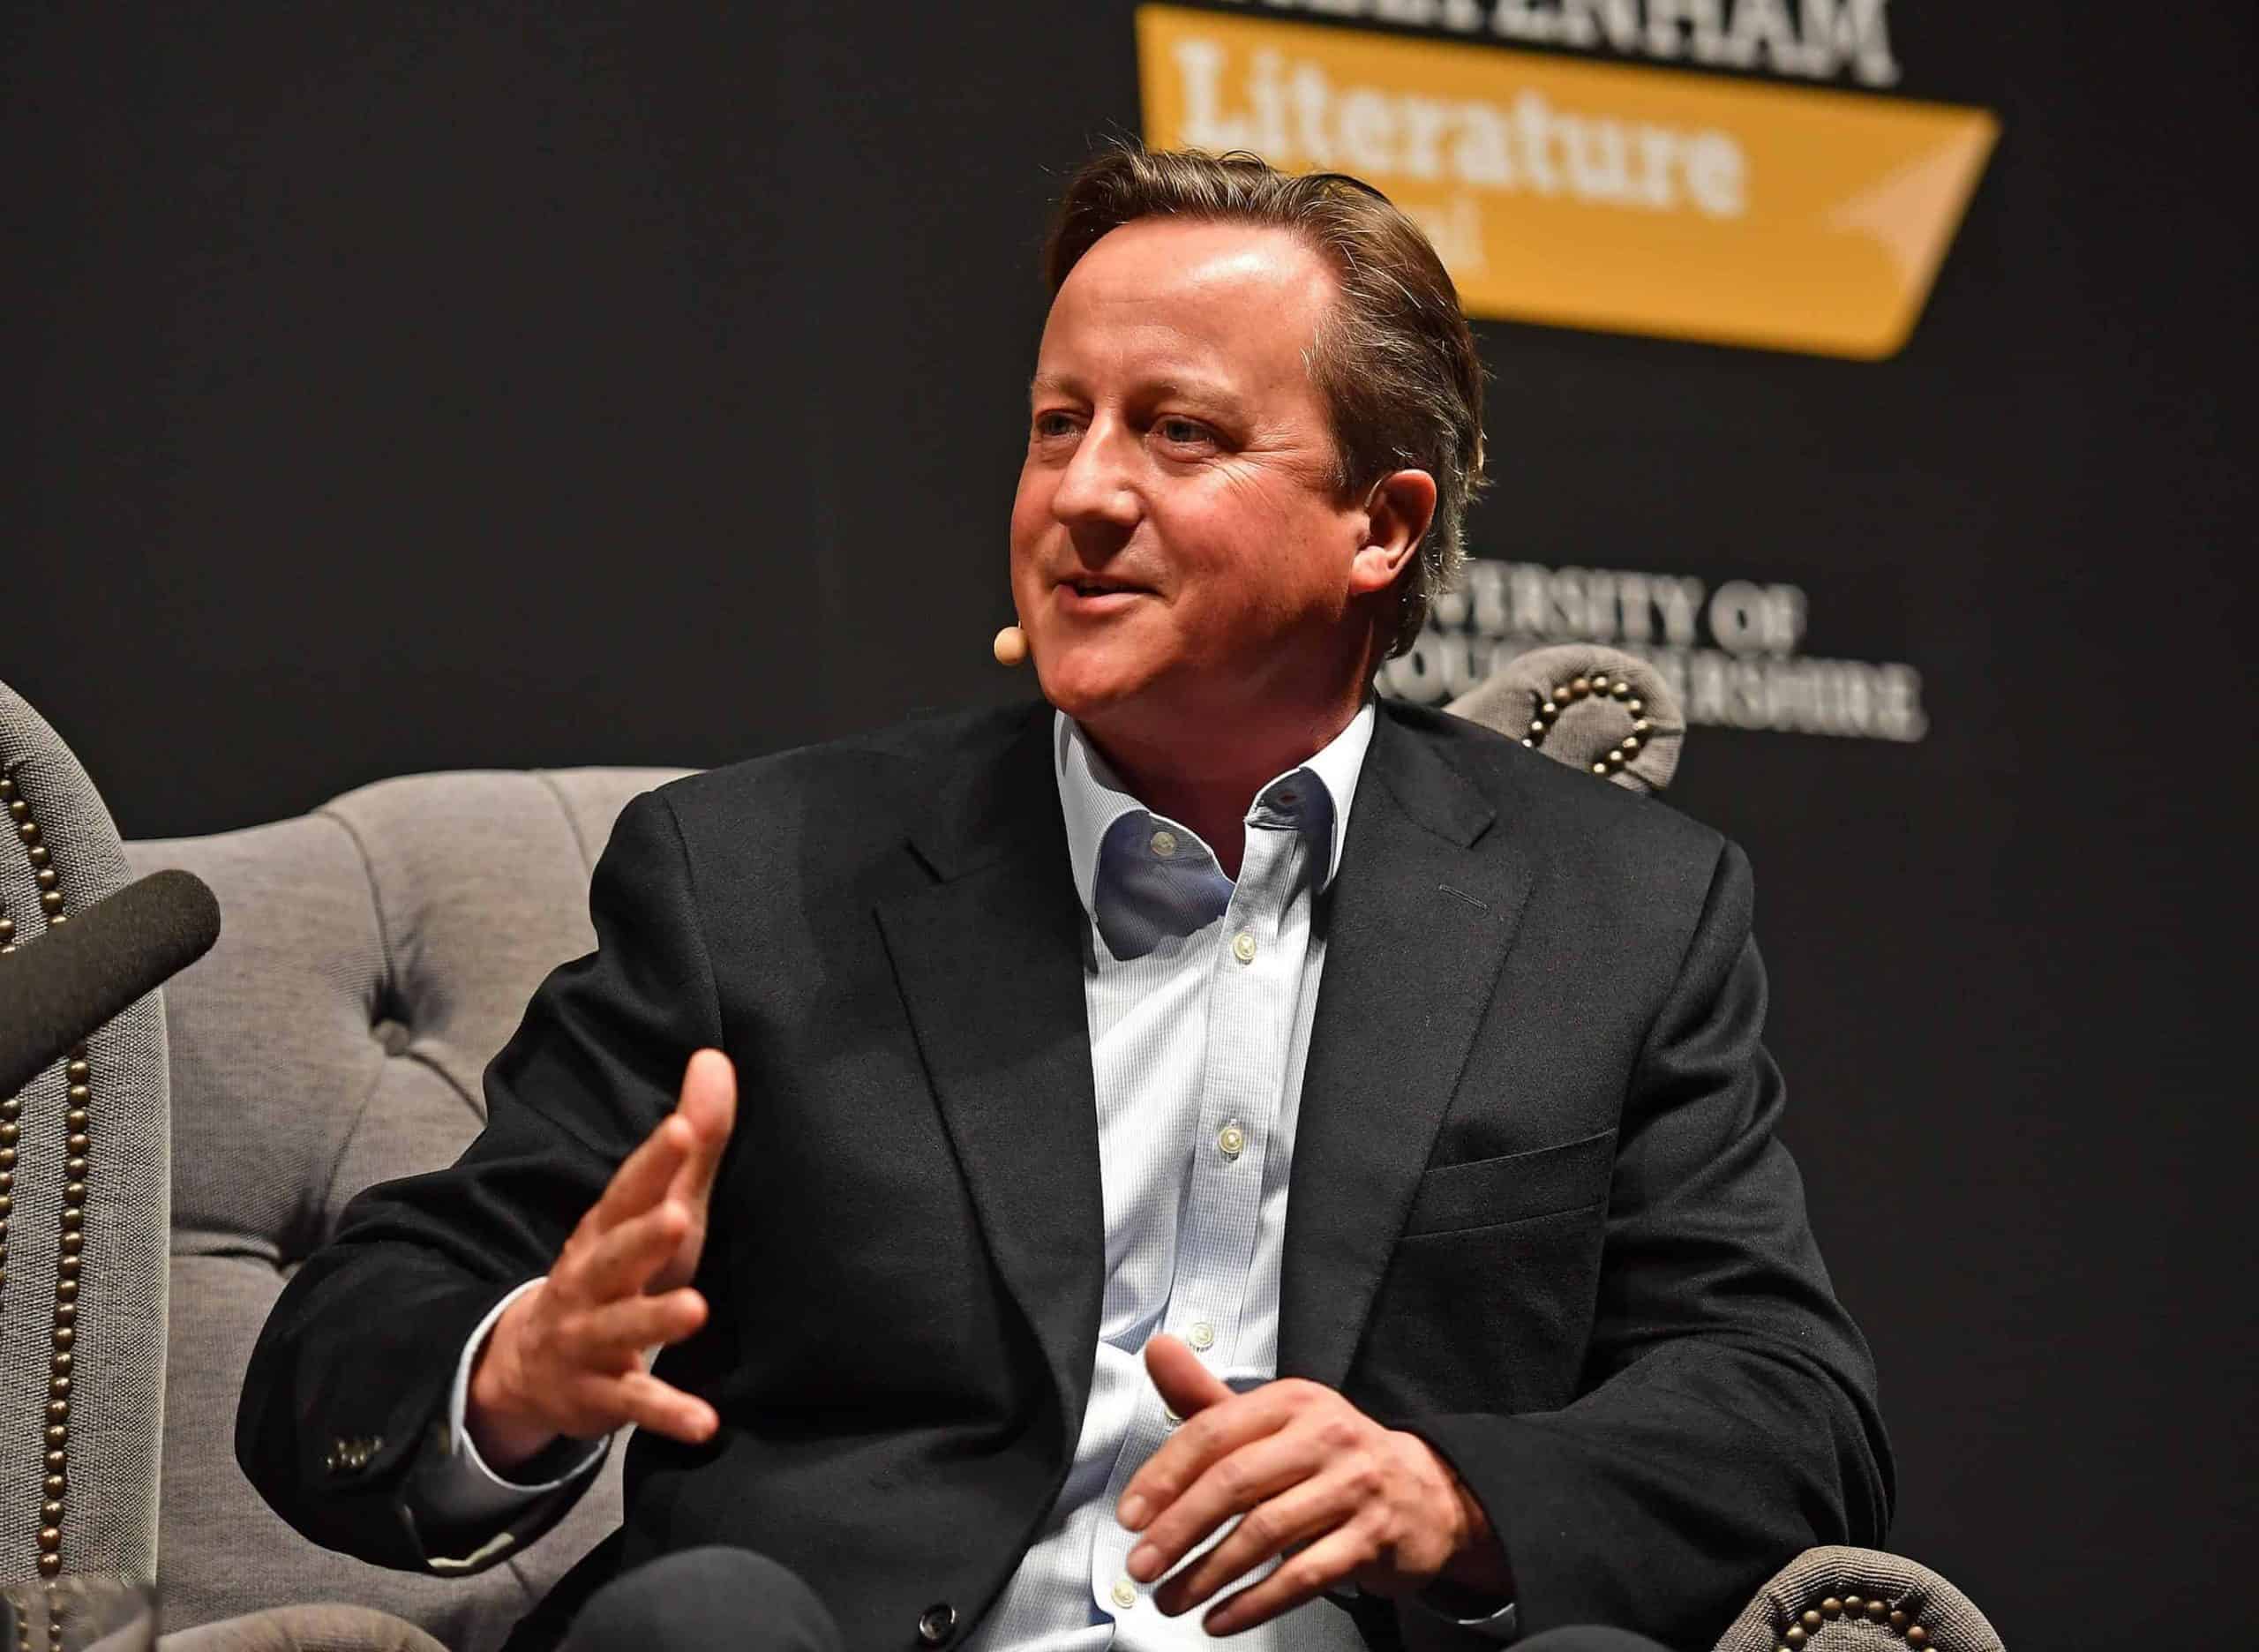 Lucrative speaking circuit helps David Cameron bank £836,000 profit in a year